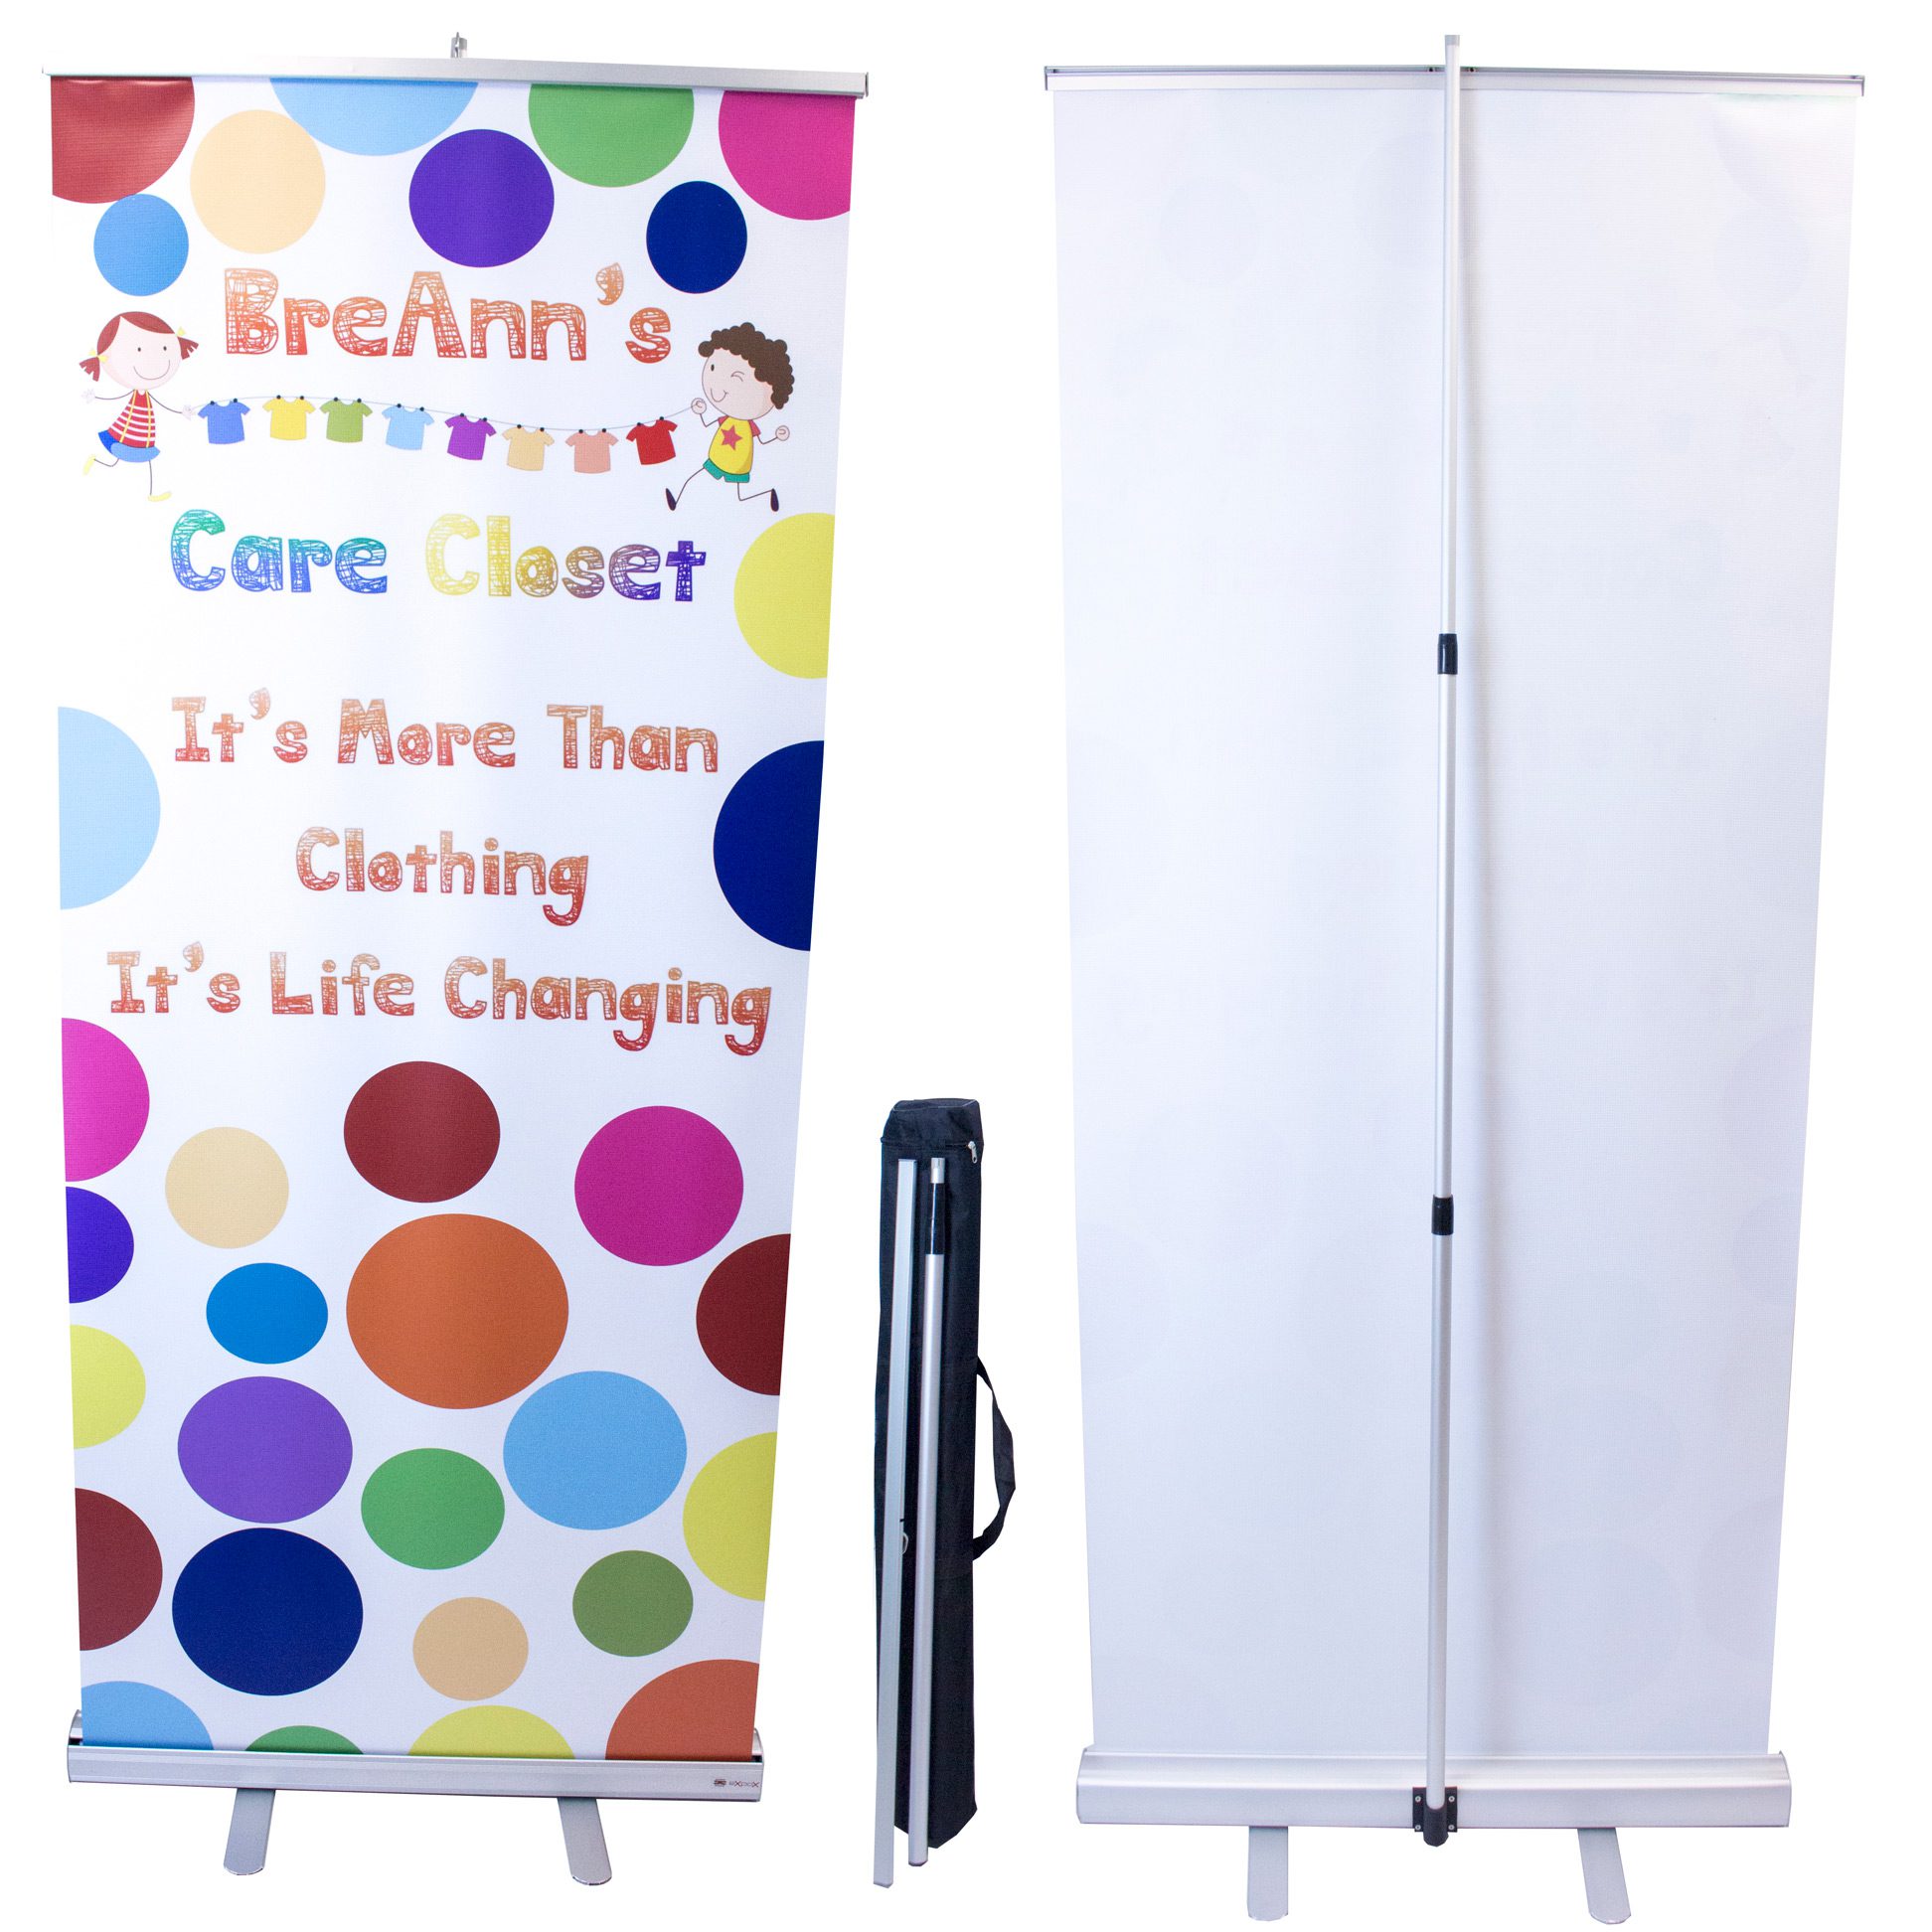 rush-trade-show-banner-stand-bdr33s-retractable-banner-stand